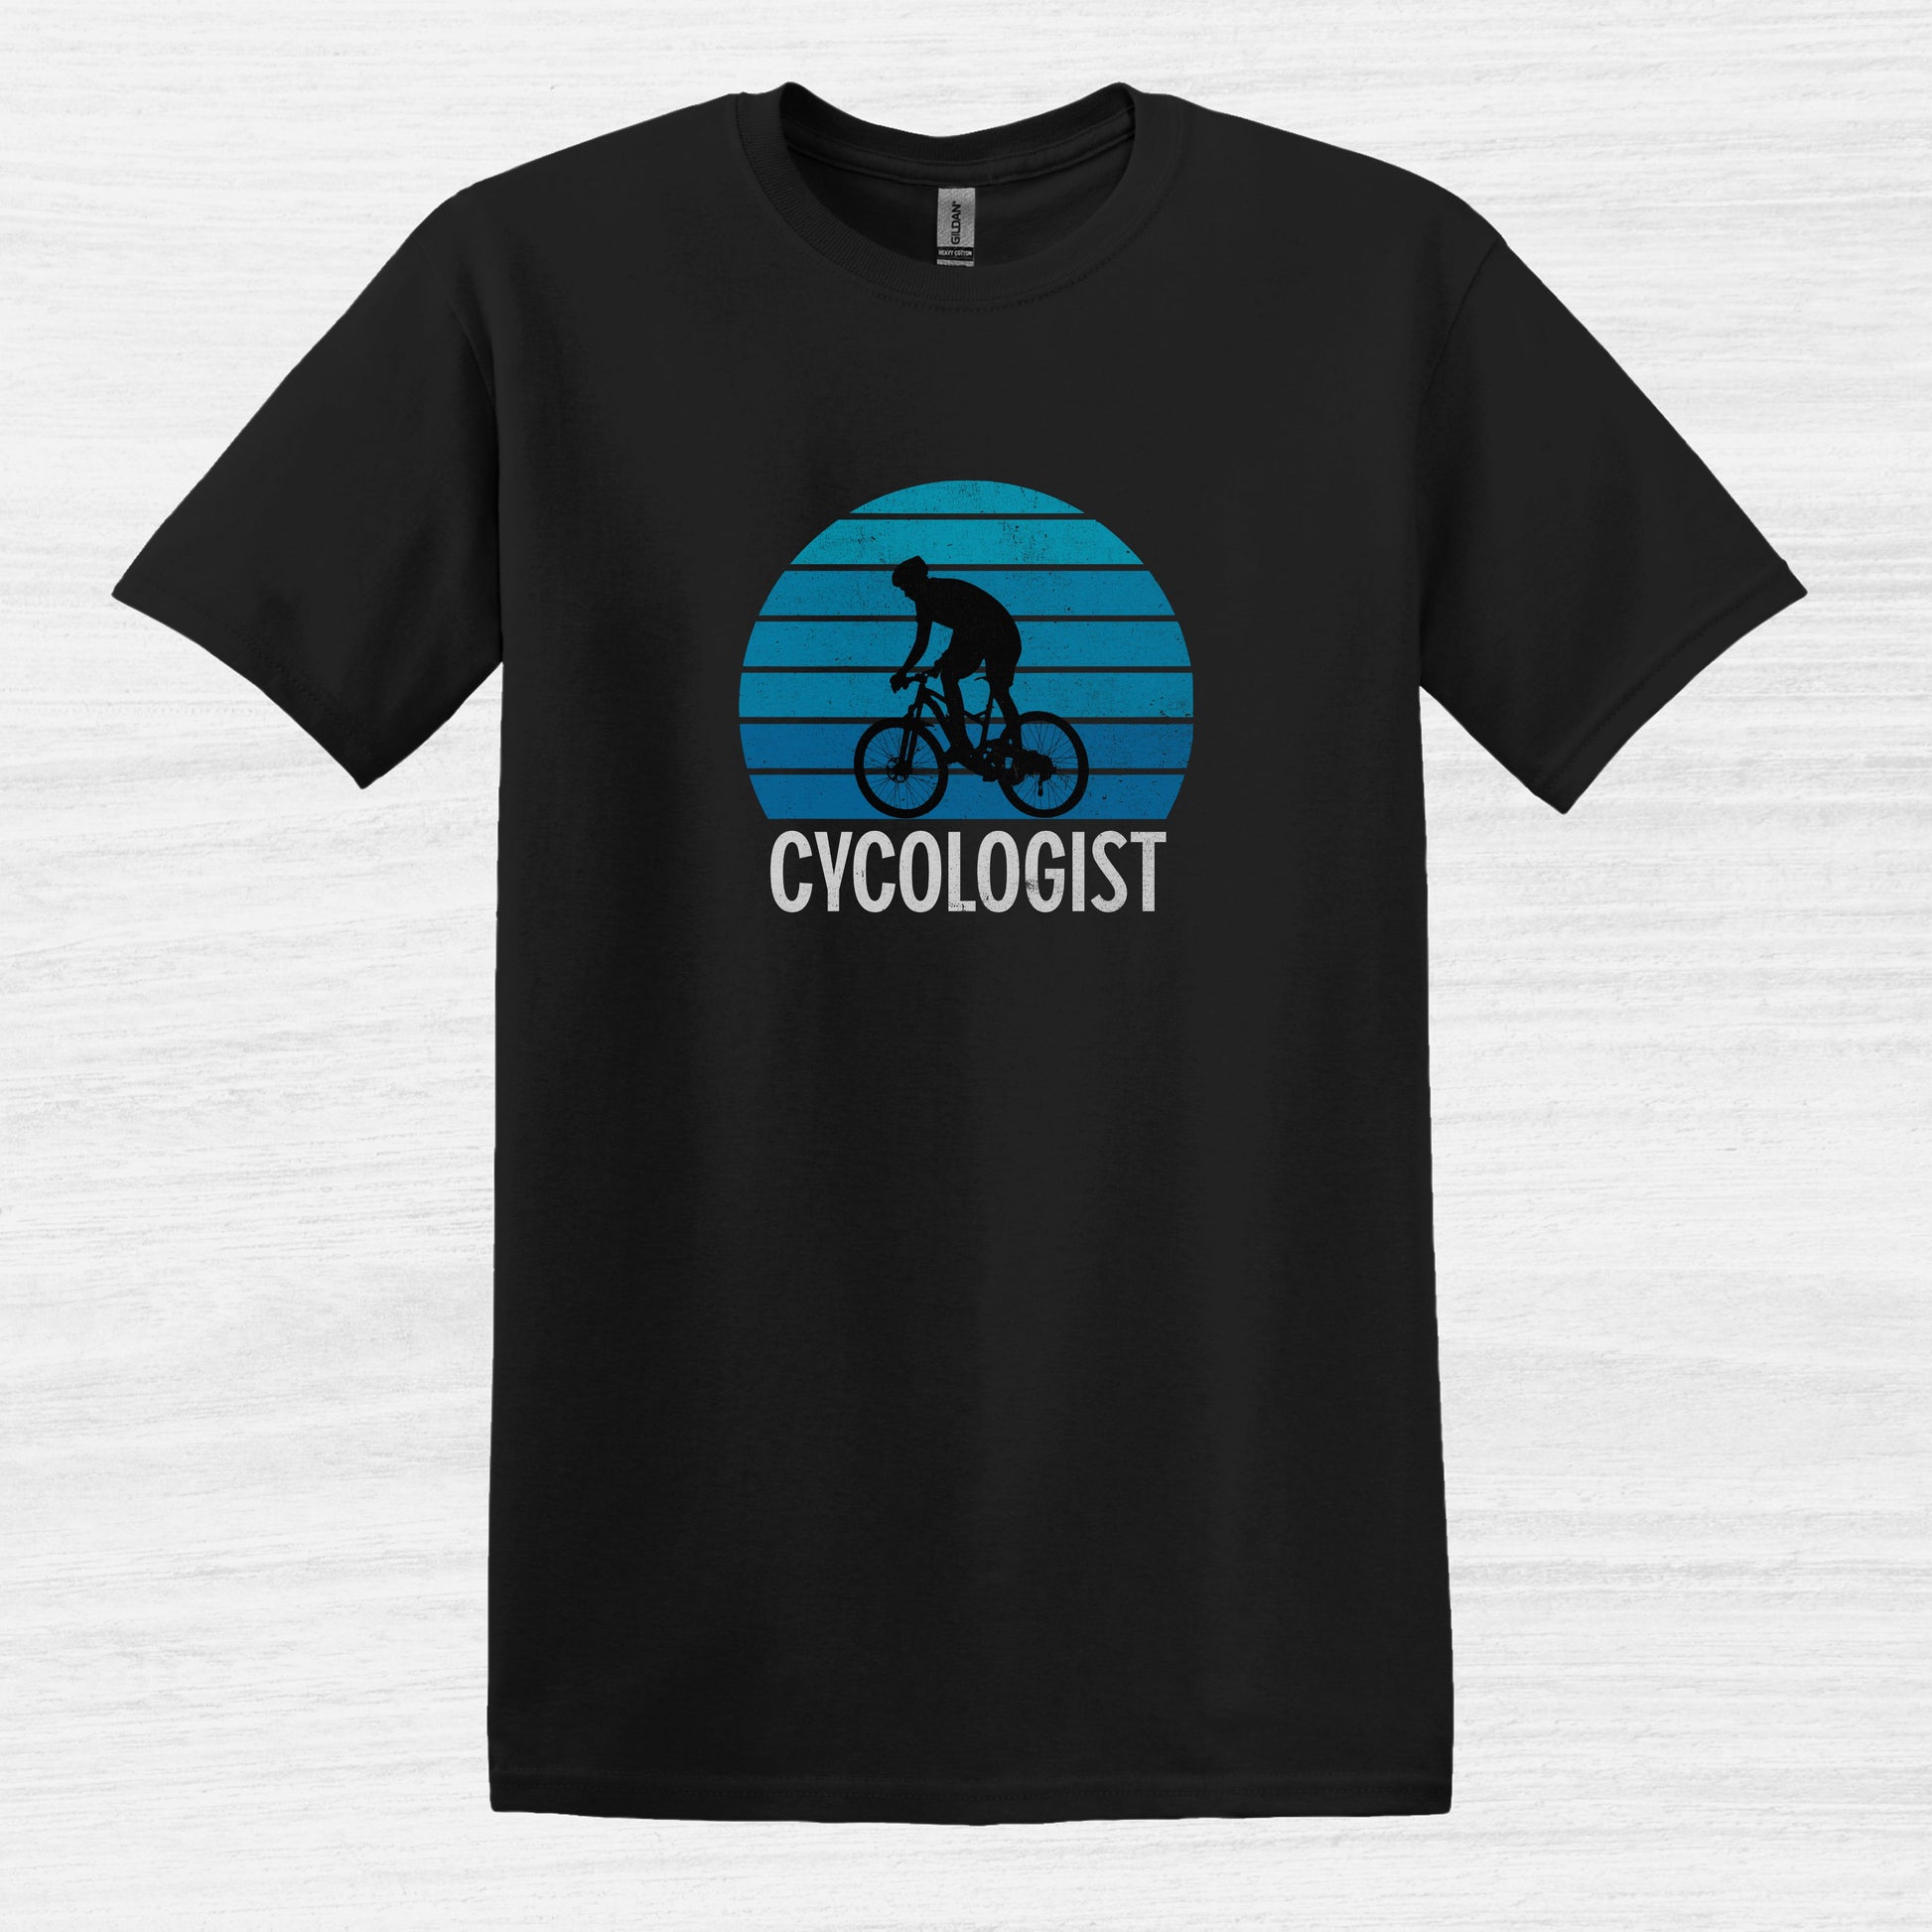 Bike Bliss Cycologist Bicycle T-Shirt for Men Vintage Style Black 2